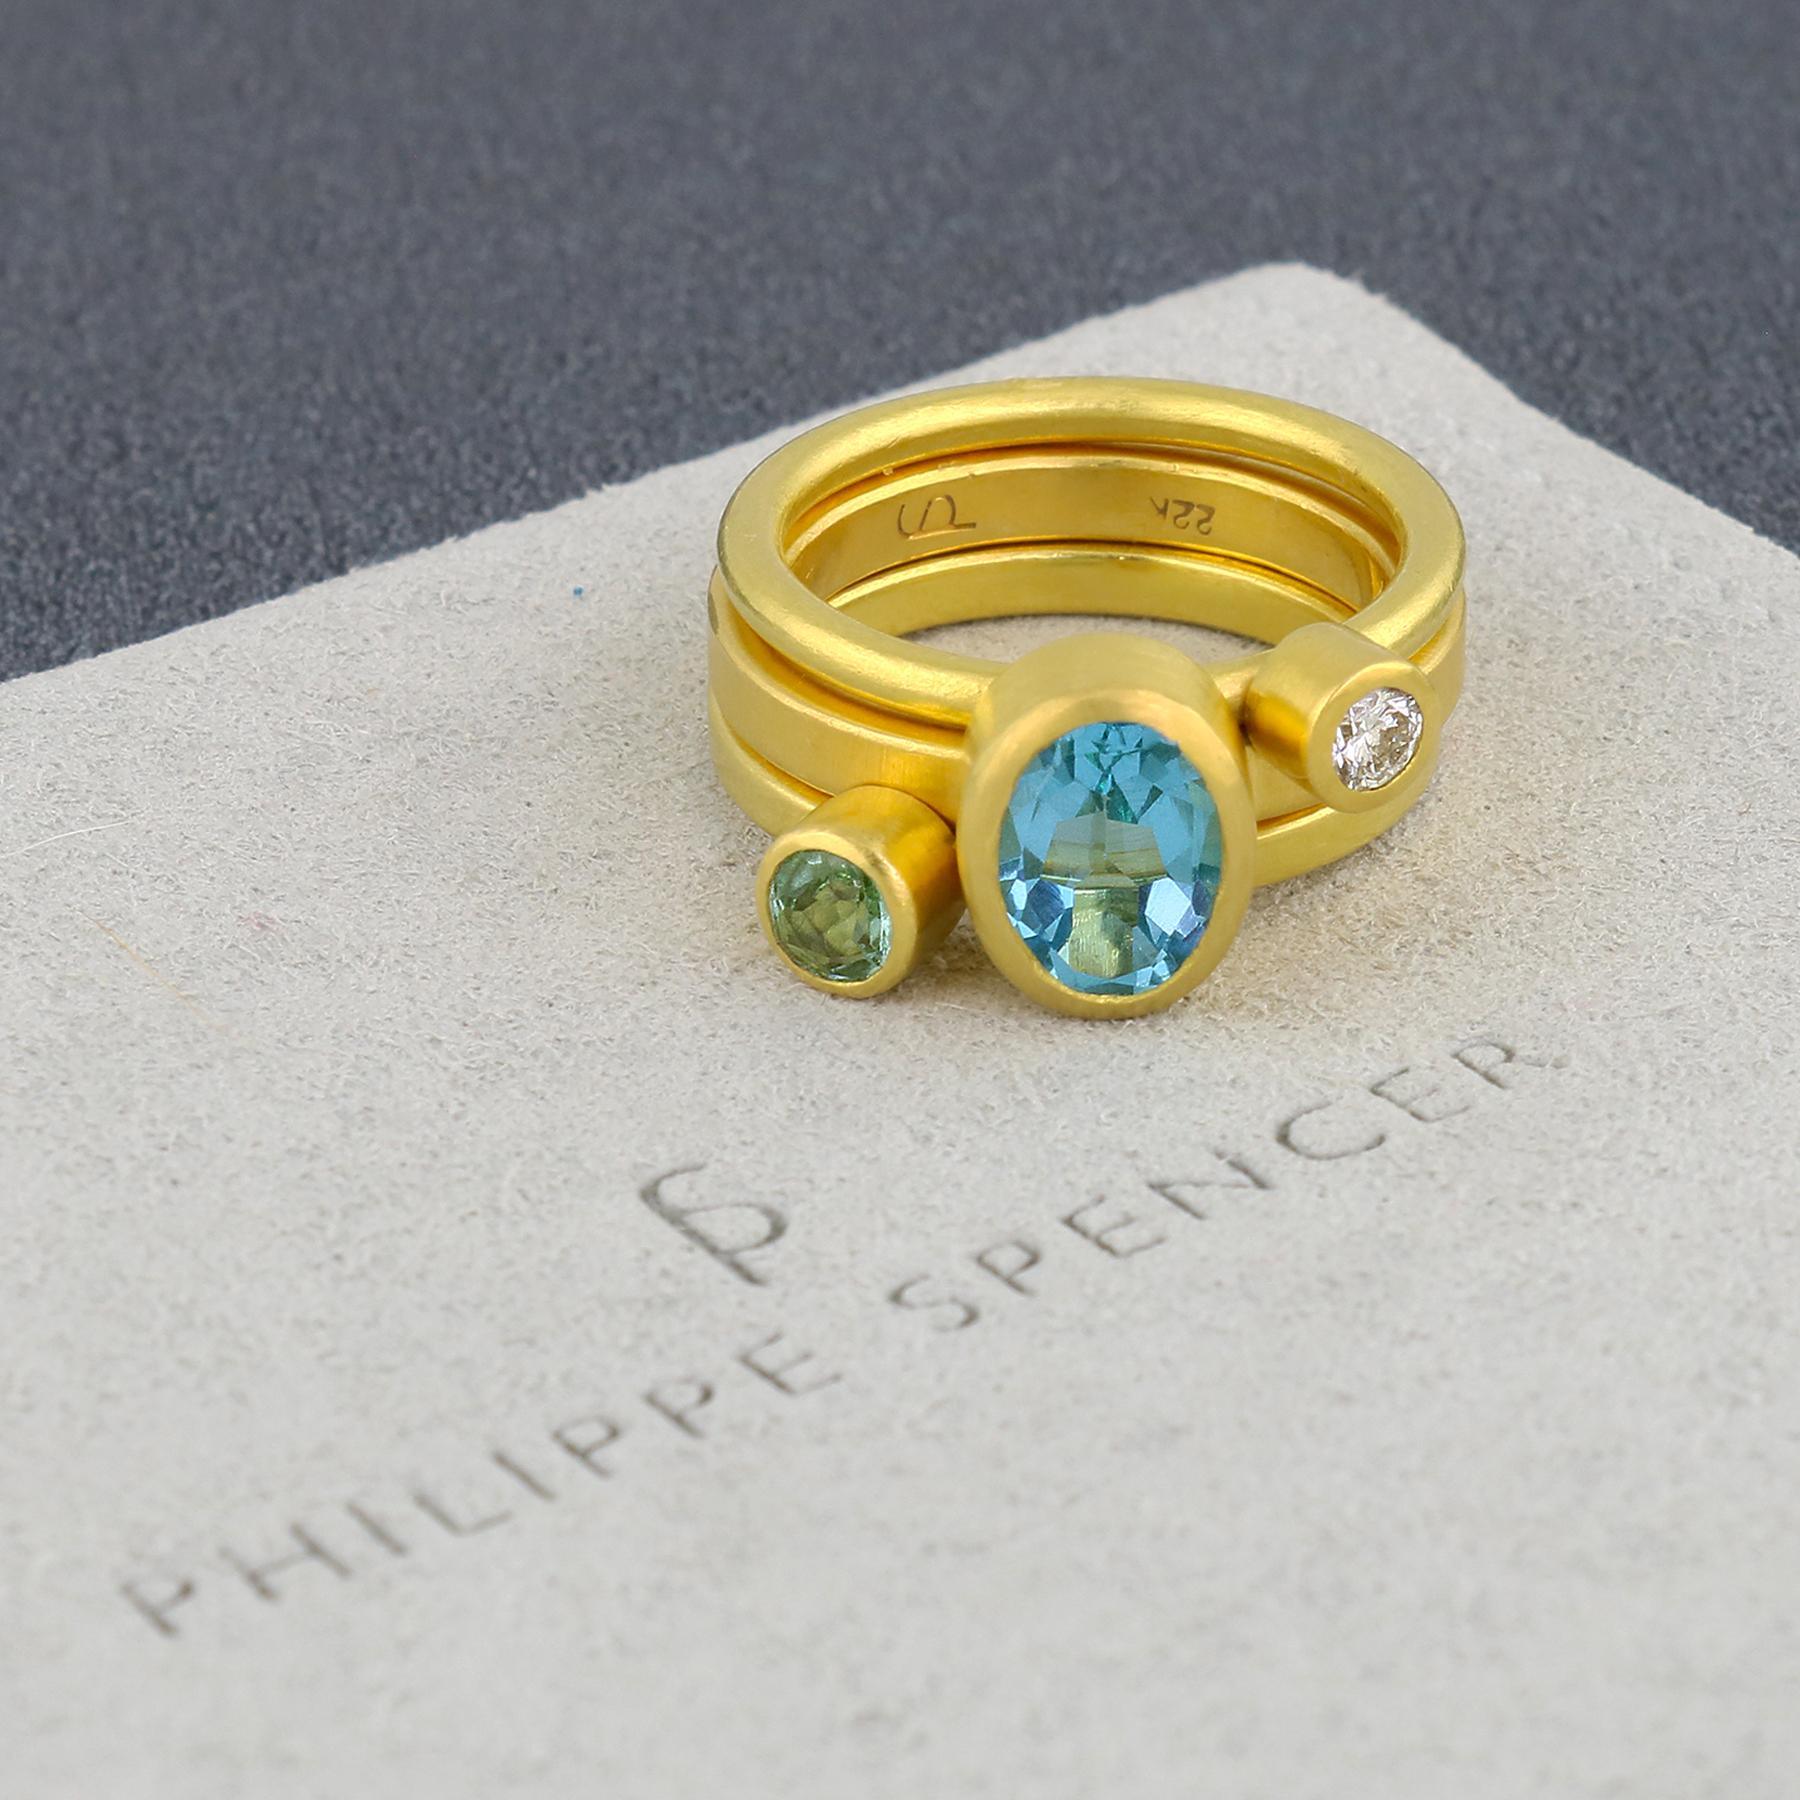 Artisan PHILIPPE SPENCER 2.15 Ct. Blue Topaz Solitaire Ring in 22K Gold For Sale